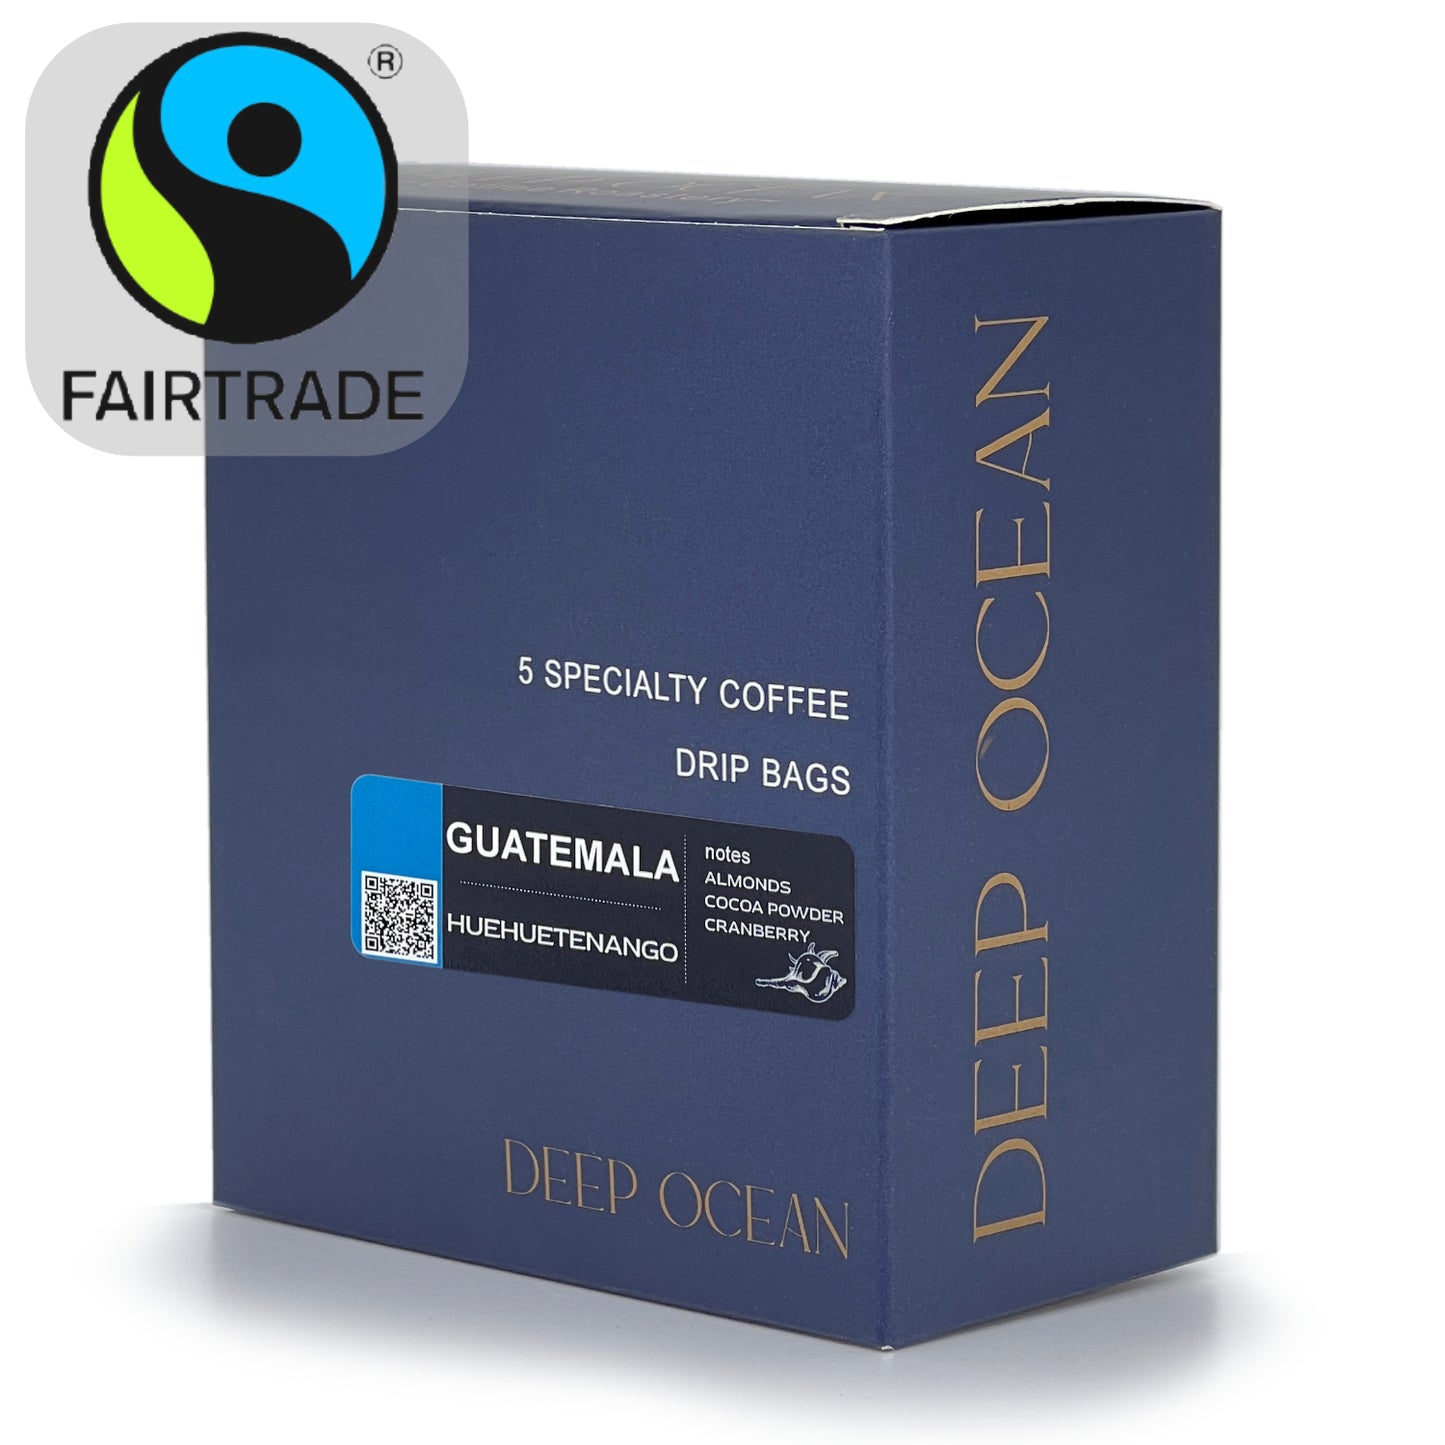 variant 1 - light roasted coffee Guatemala  in drip boxes is great choice of specialty coffee.